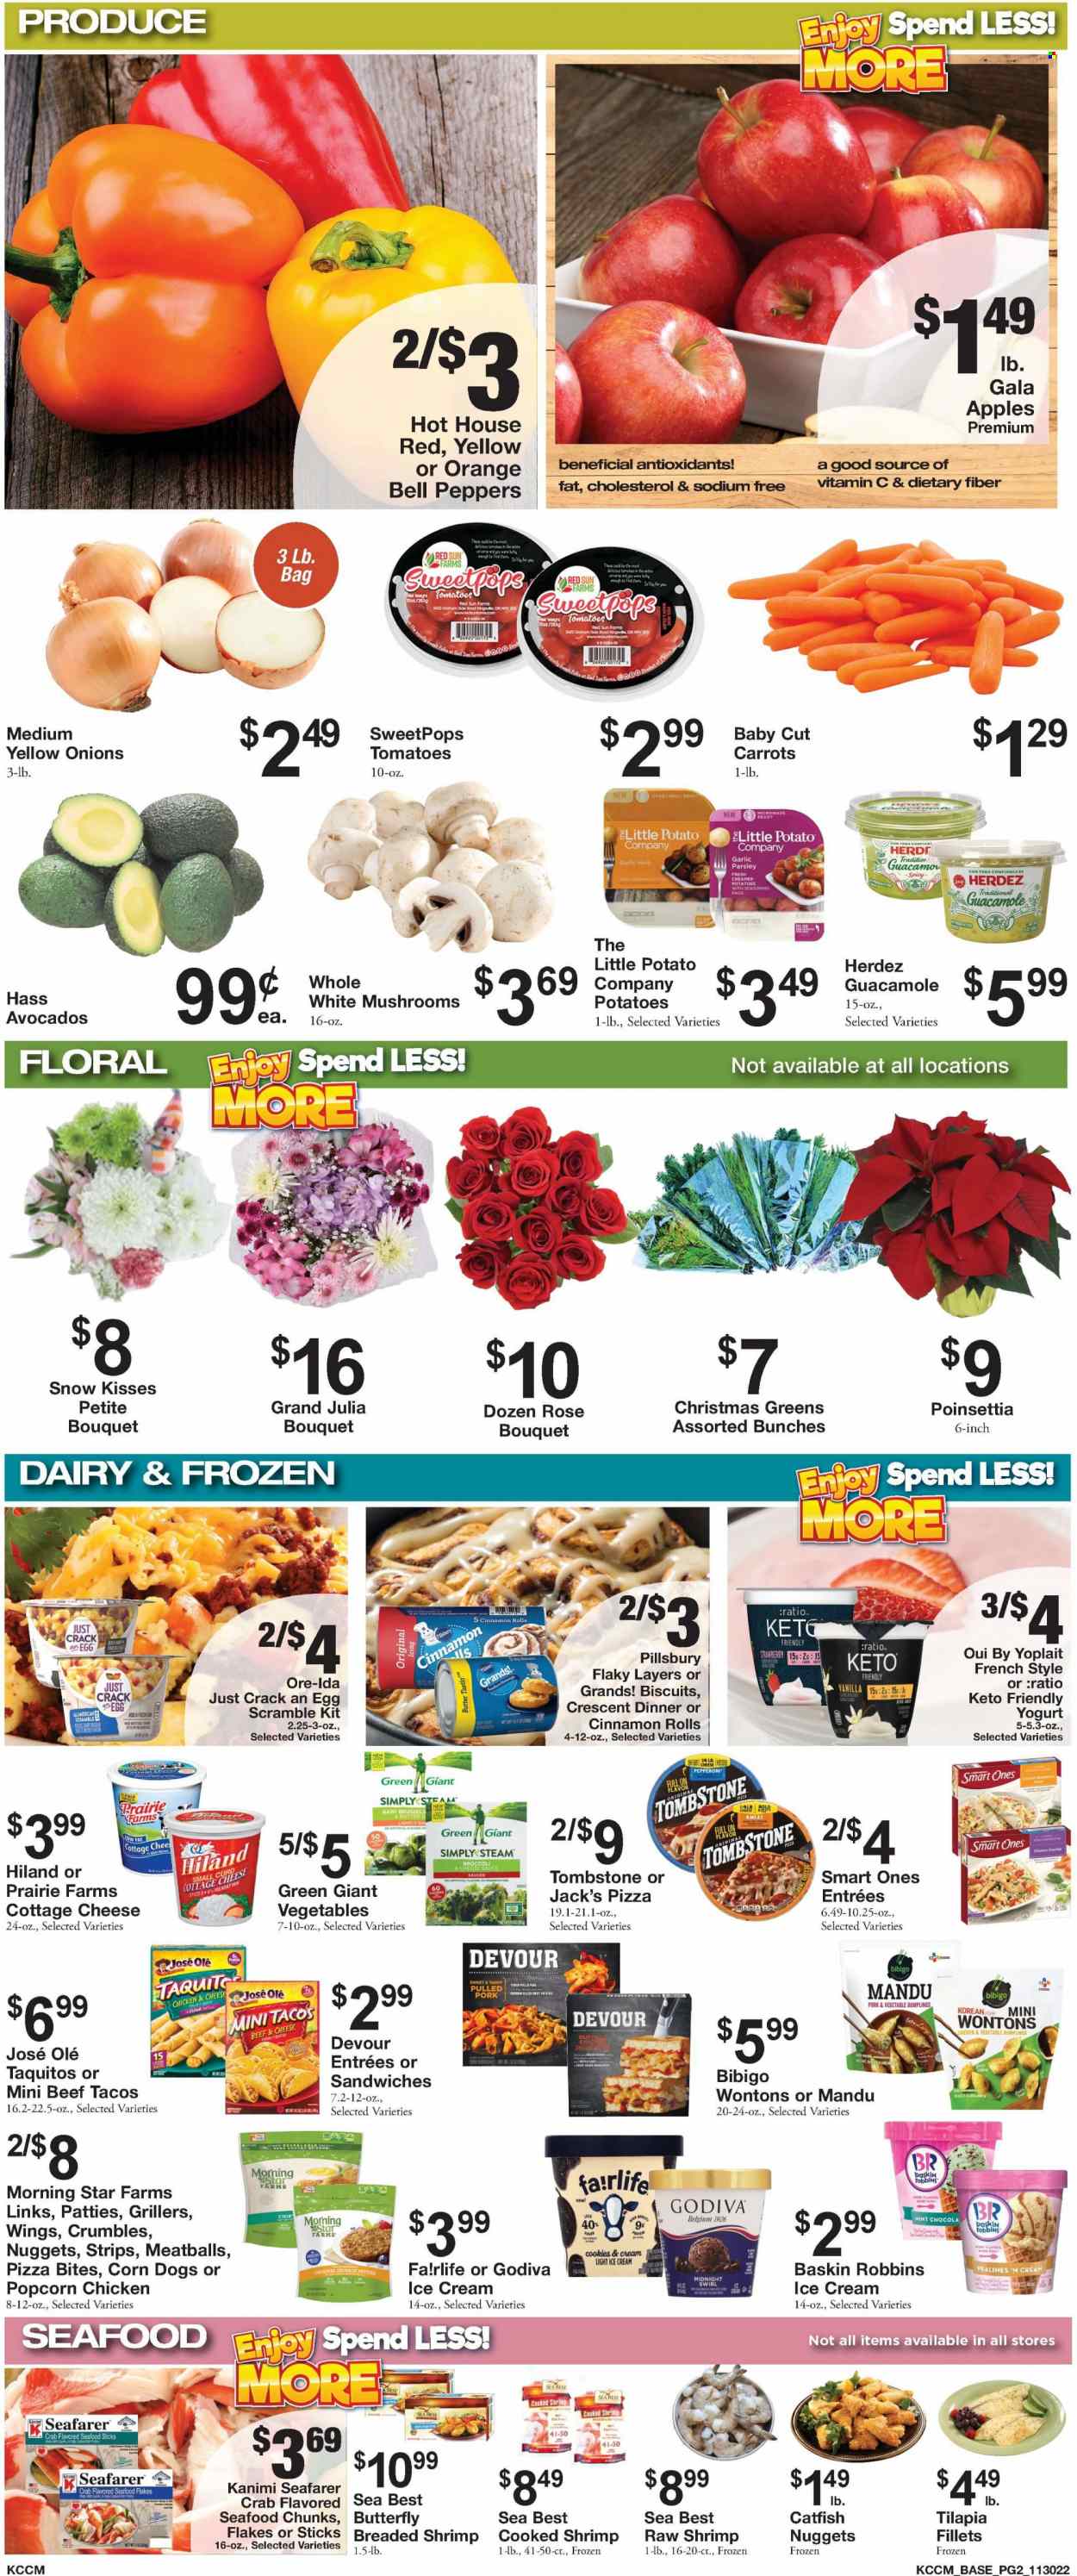 thumbnail - Bratchers Market Flyer - 11/30/2022 - 12/06/2022 - Sales products - cinnamon roll, bell peppers, broccoli, carrots, garlic, sweet potato, potatoes, parsley, onion, peppers, apples, Gala, oranges, catfish, tilapia, seafood, crab, shrimps, catfish nuggets, pizza, meatballs, sandwich, sauce, Pillsbury, dumplings, taquitos, pulled pork, sausage, pepperoni, guacamole, cottage cheese, yoghurt, Yoplait, butter, ice cream, strips, Devour, Ore-Ida, cookies, Godiva, biscuit, popcorn, spice, rosé wine, bourbon, pork meat, poinsettia, bunches, bouquet, rose, vitamin c. Page 2.